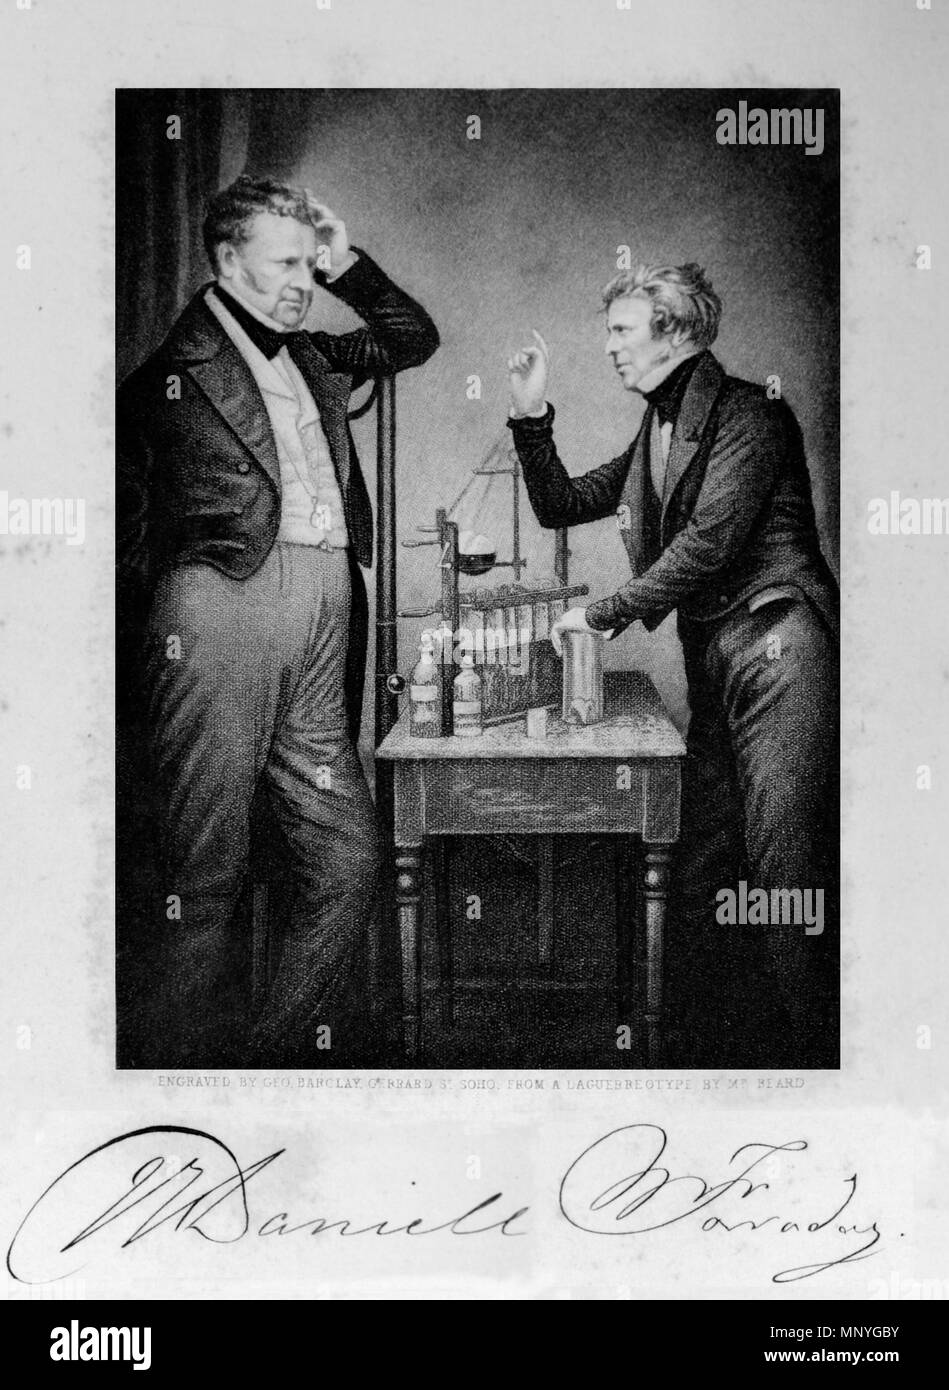 Portrait of Faraday and Daniell .  English: Portrait of Michael Faraday (22 September 1791 – 25 August 1867) John Frederic Daniell (12 March 1790 – 13 March 1845)  from Sketches of the Royal Society and Royal Society Club by Sir John Barrow, Bart., F.R.S. London : John Murray, 1849, facing page 85. Under the picture are signatures for Faraday and Daniell, then the note: 'ENGRAVED BY GEO. BARCLAY, GERRARD ST. SOHO. FROM A DAGUERROTYPE BY MR. BEARD.'  . circa 1840. Sir John Barrow, 1st Baronet, 1764-1848 1286 Faraday and Daniell 1849 RGNb10408769 f85 Stock Photo